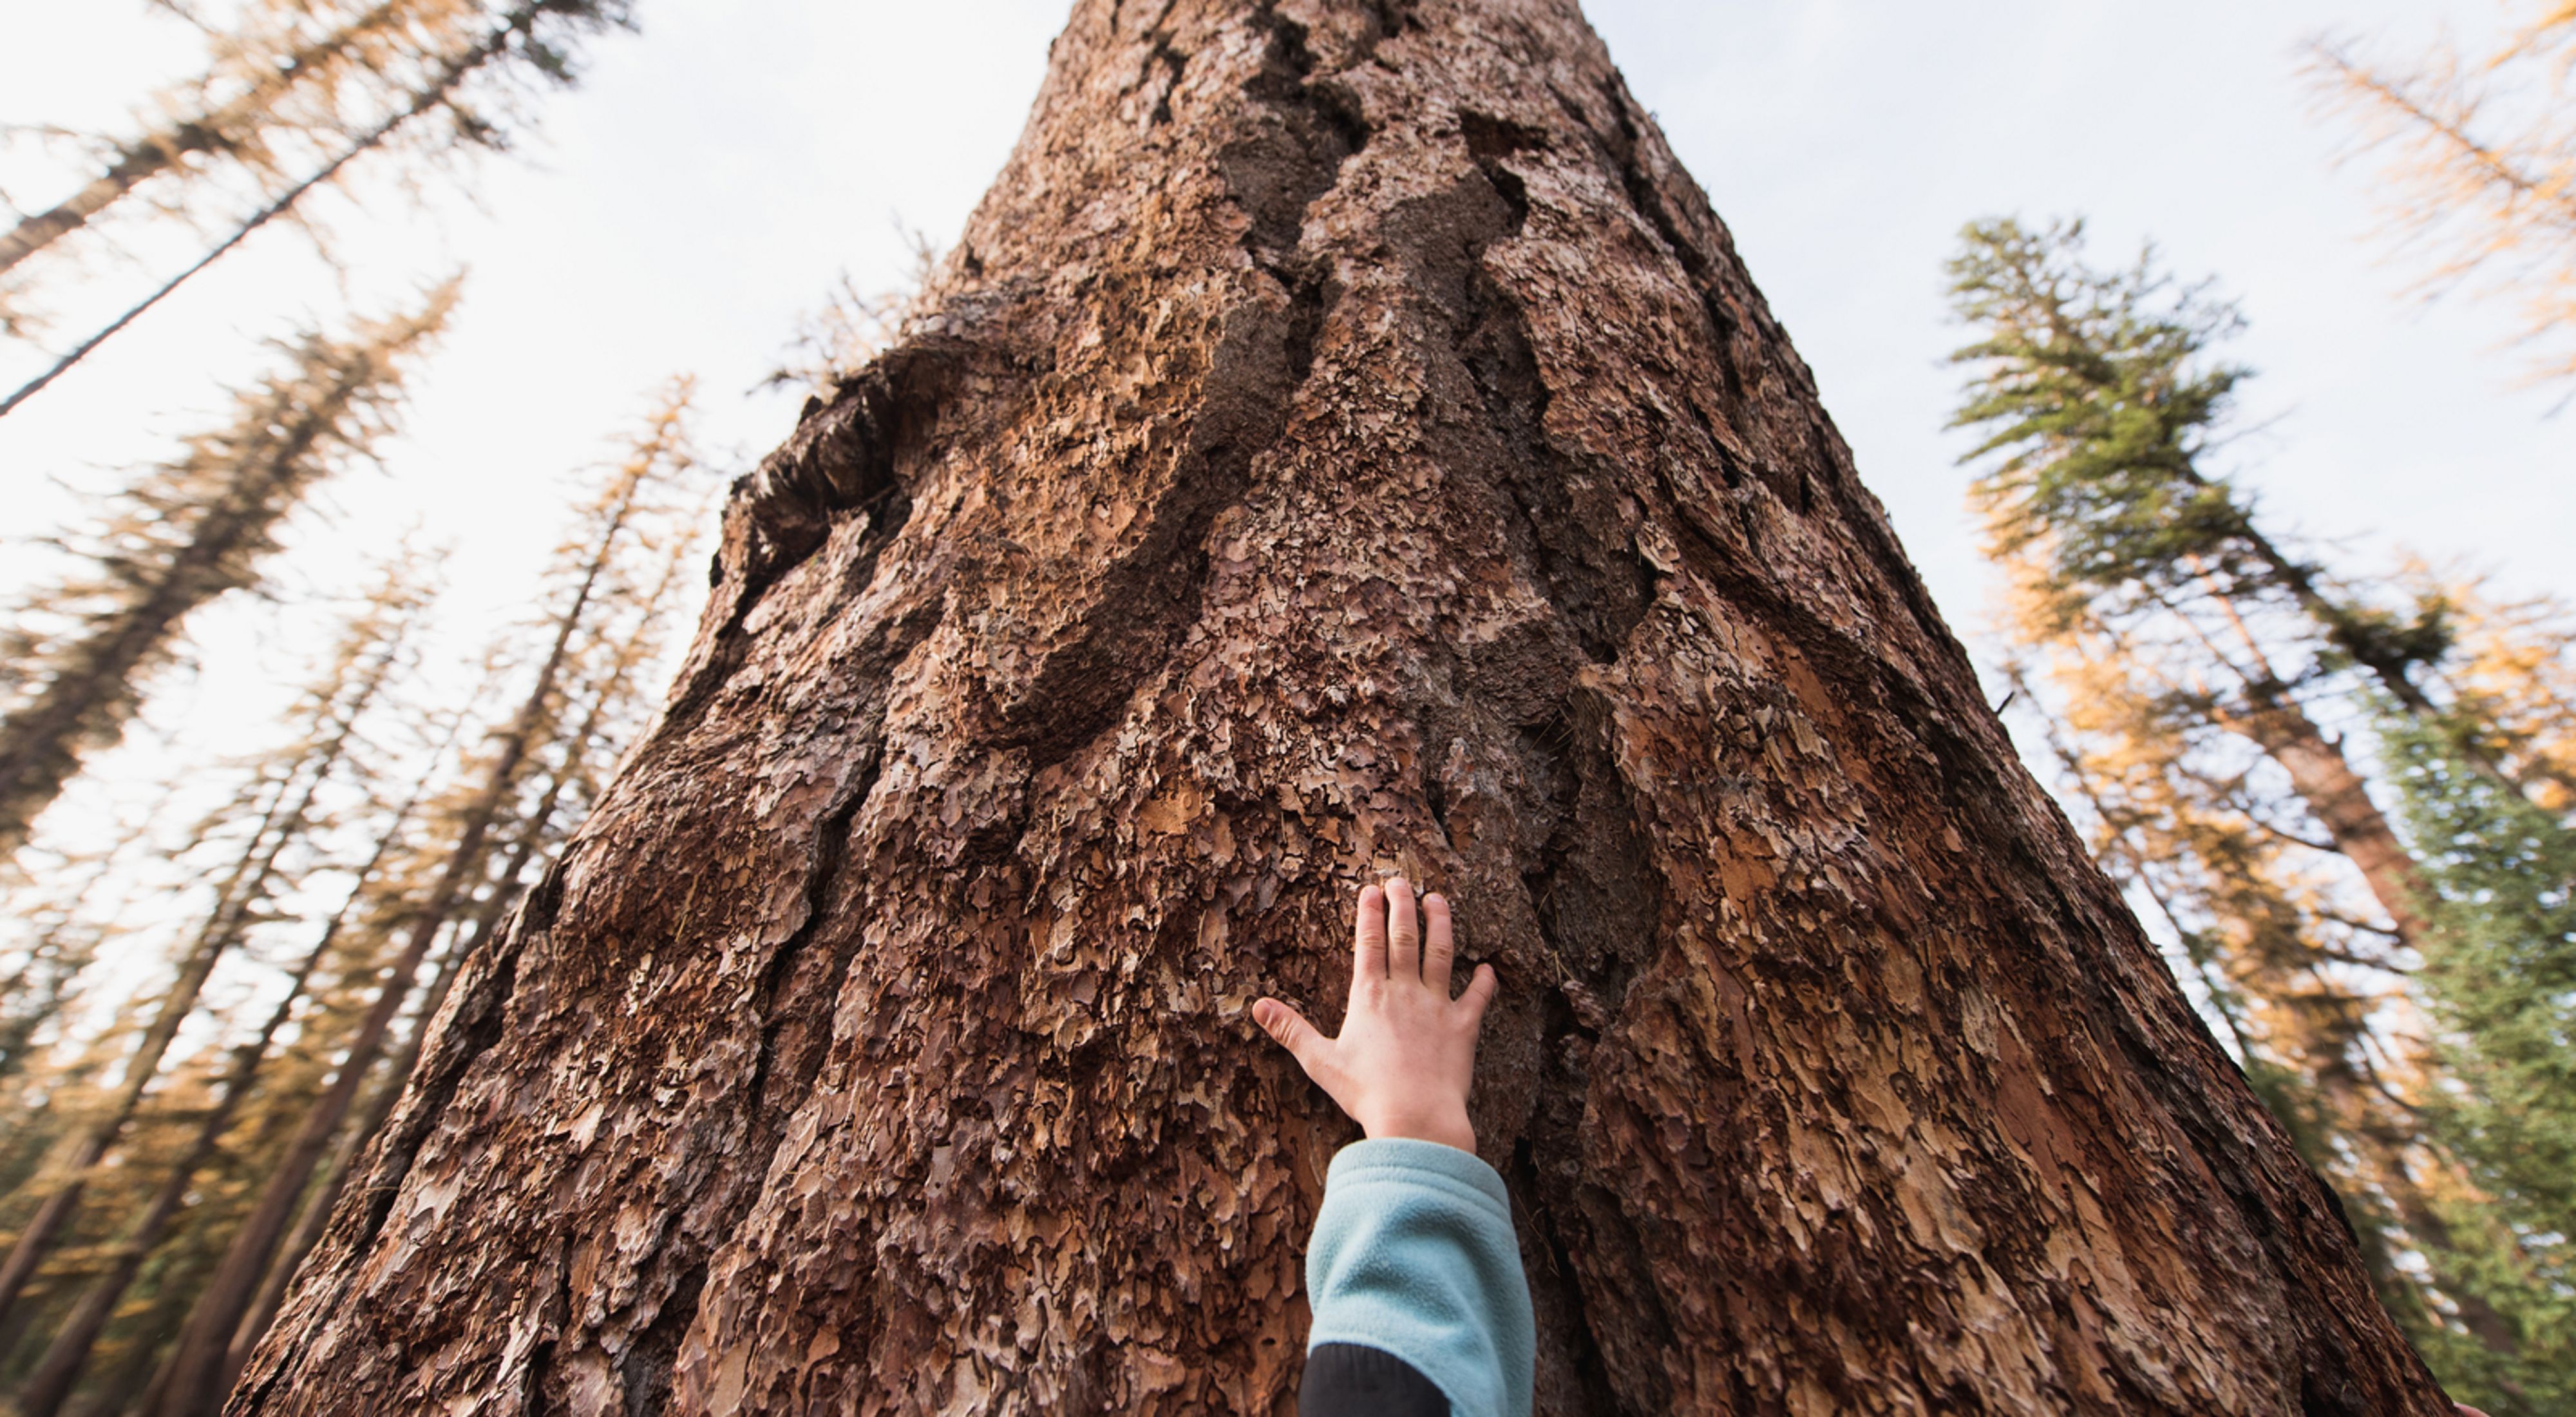 A child visits the world's largest known Western larch tree just outside of TNC's Great Western Checkerboards Project in Montana.